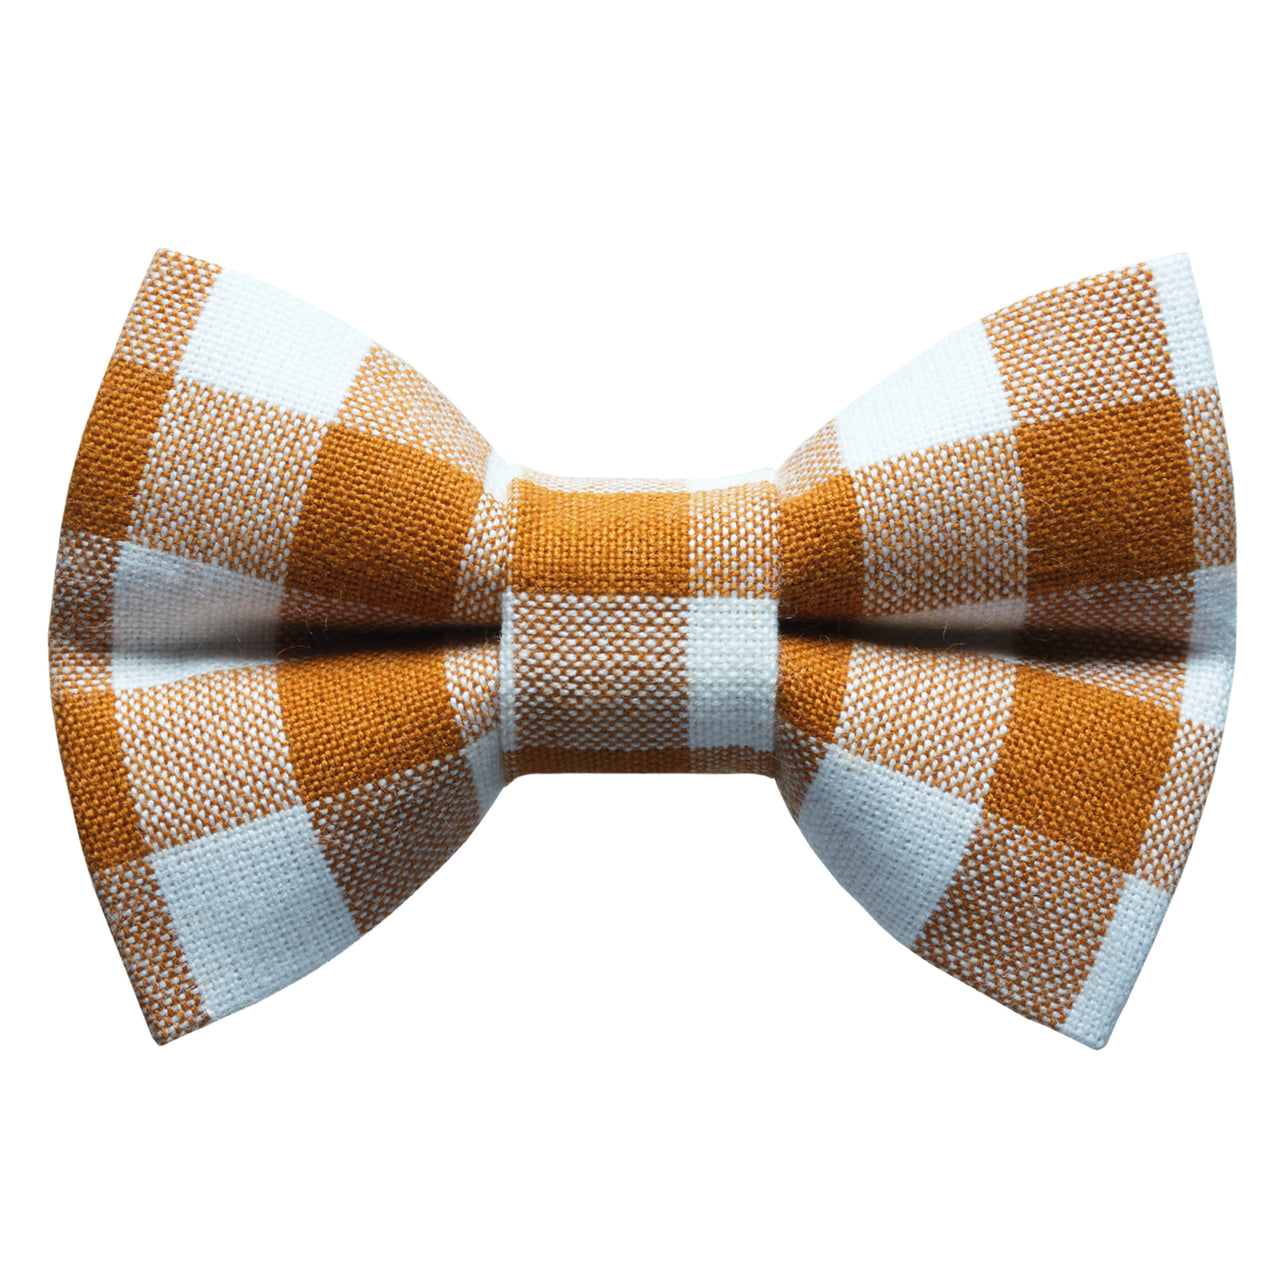 The All Checked Out - Cat / Dog Bow Tie